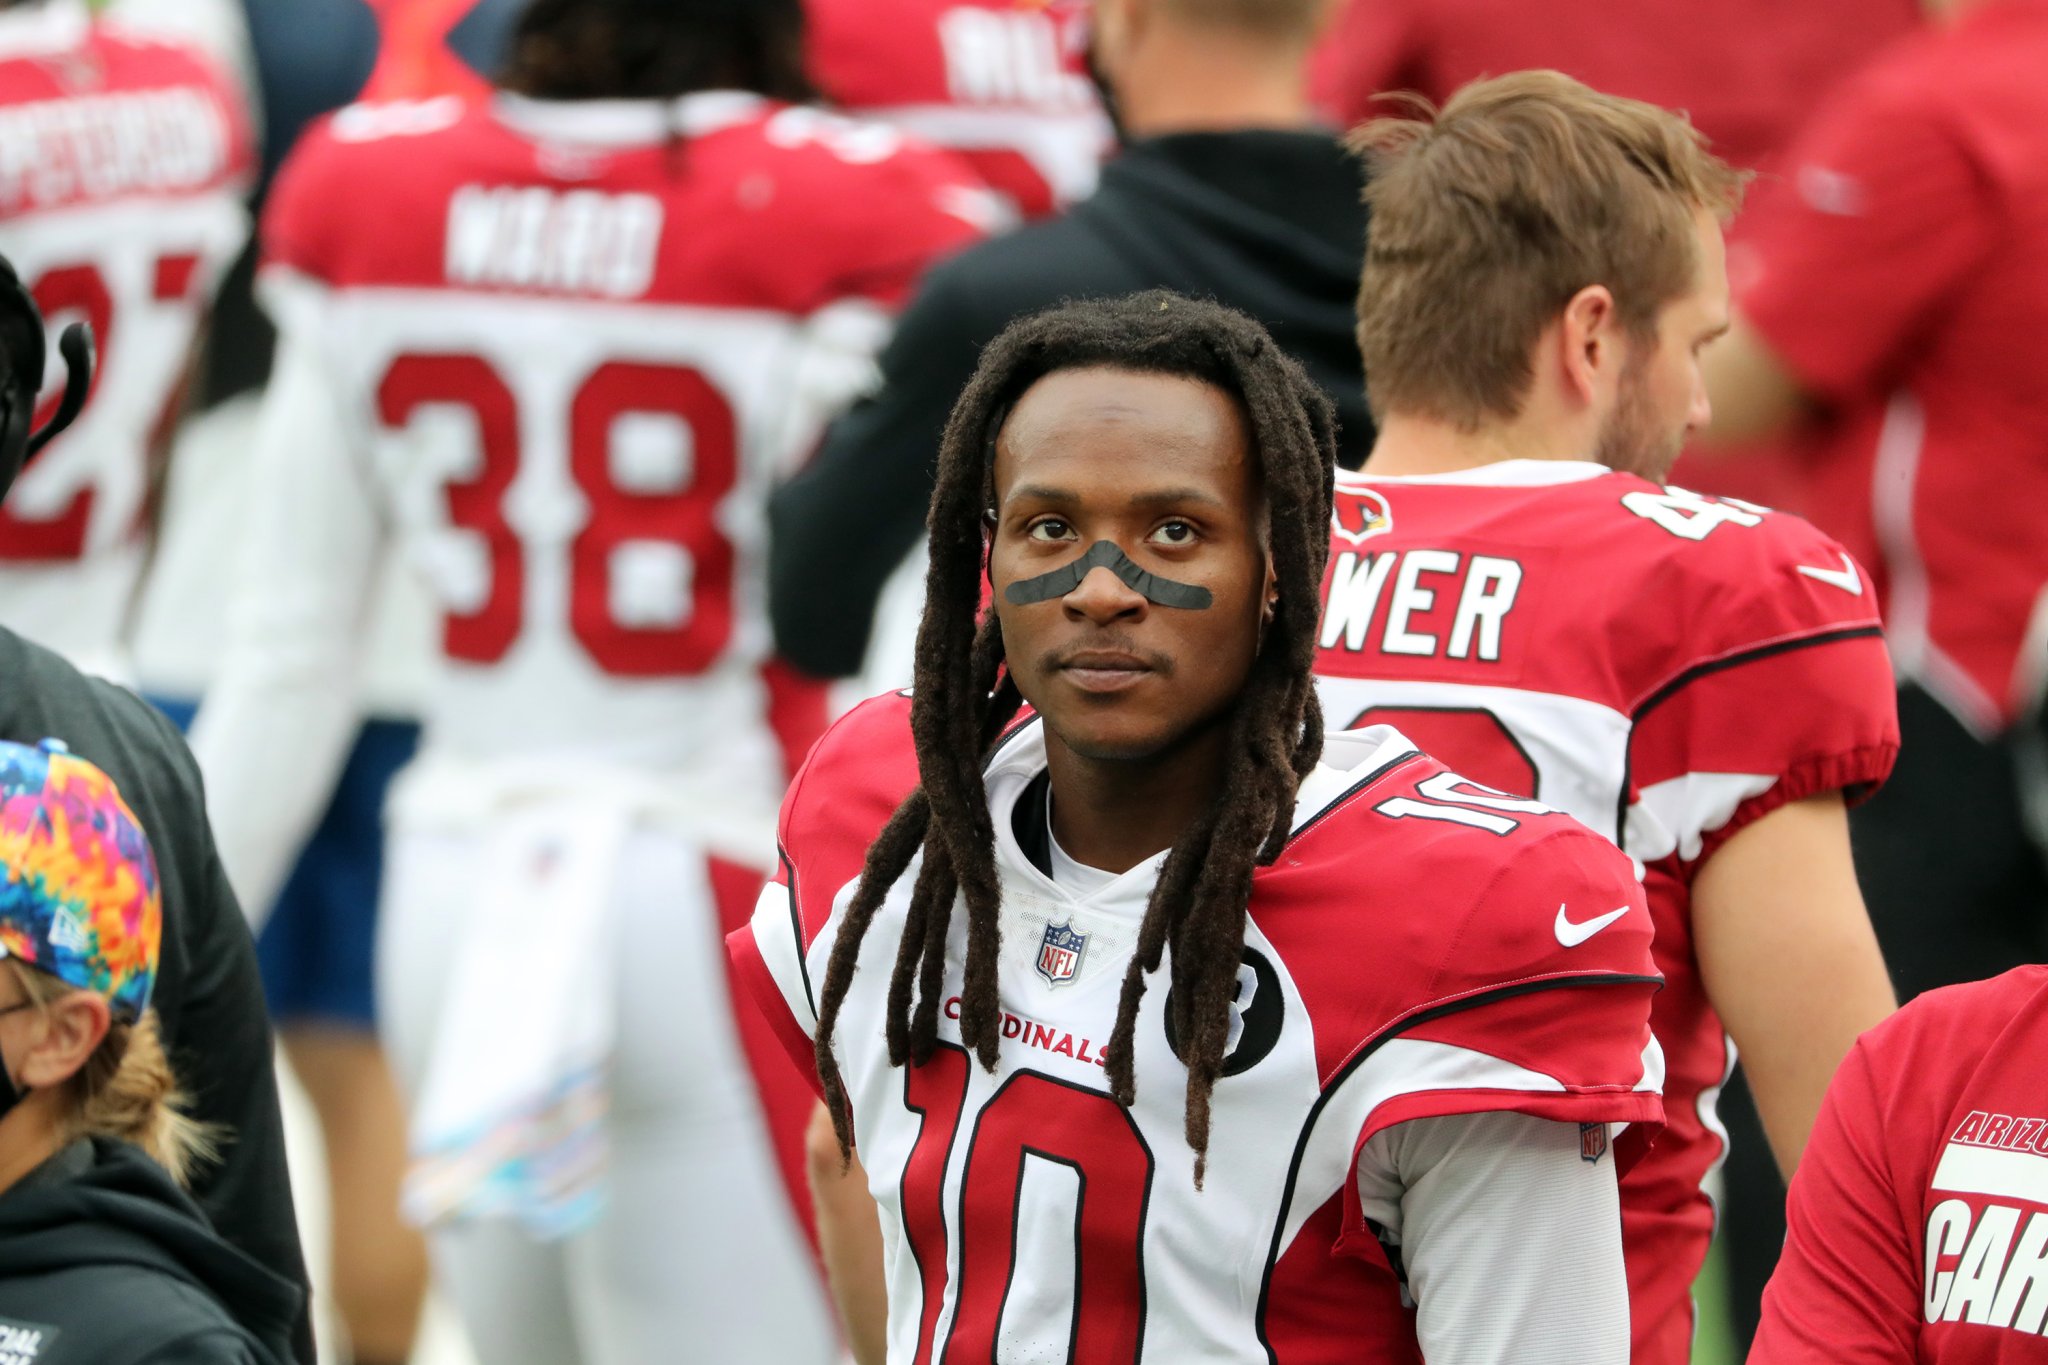 DeAndre Hopkins photographed flipping off Trump supporters before game